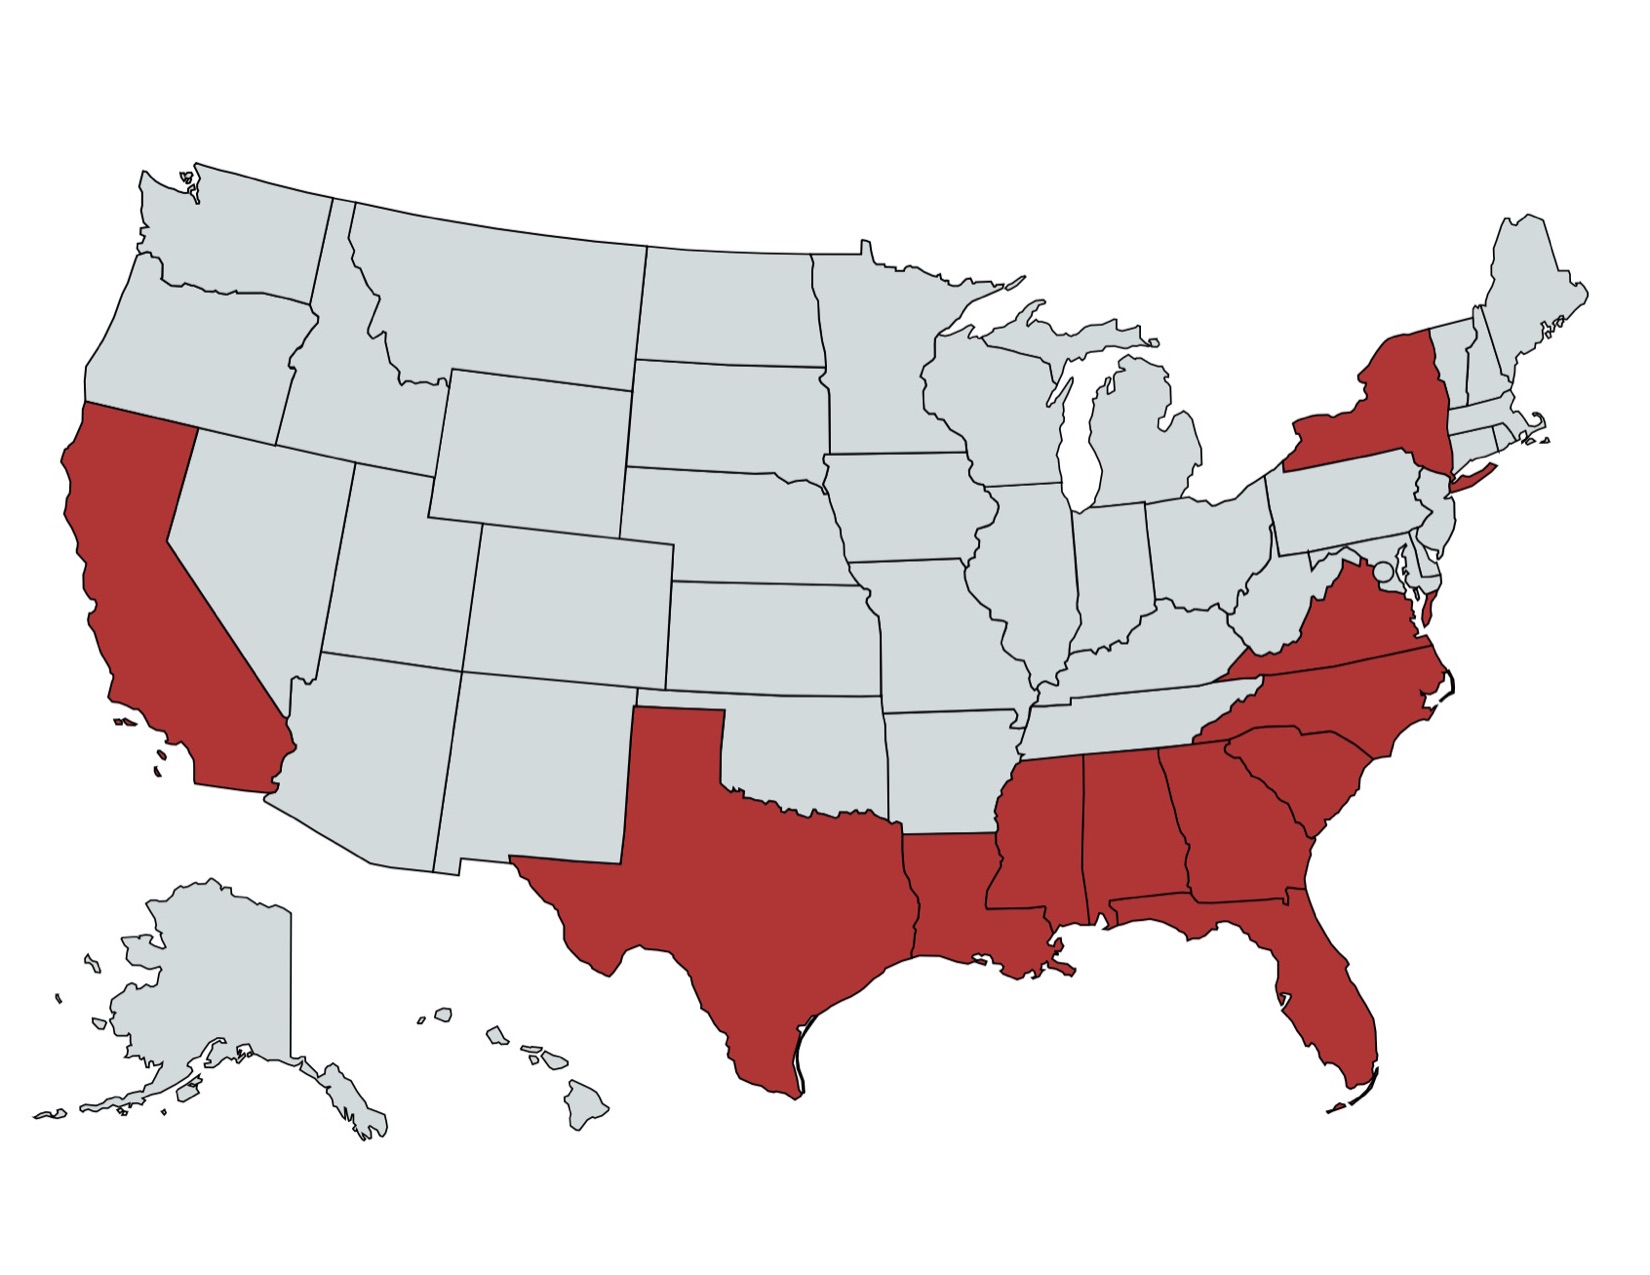 The states facing federal preclearance under proposed Voting Rights Act ...